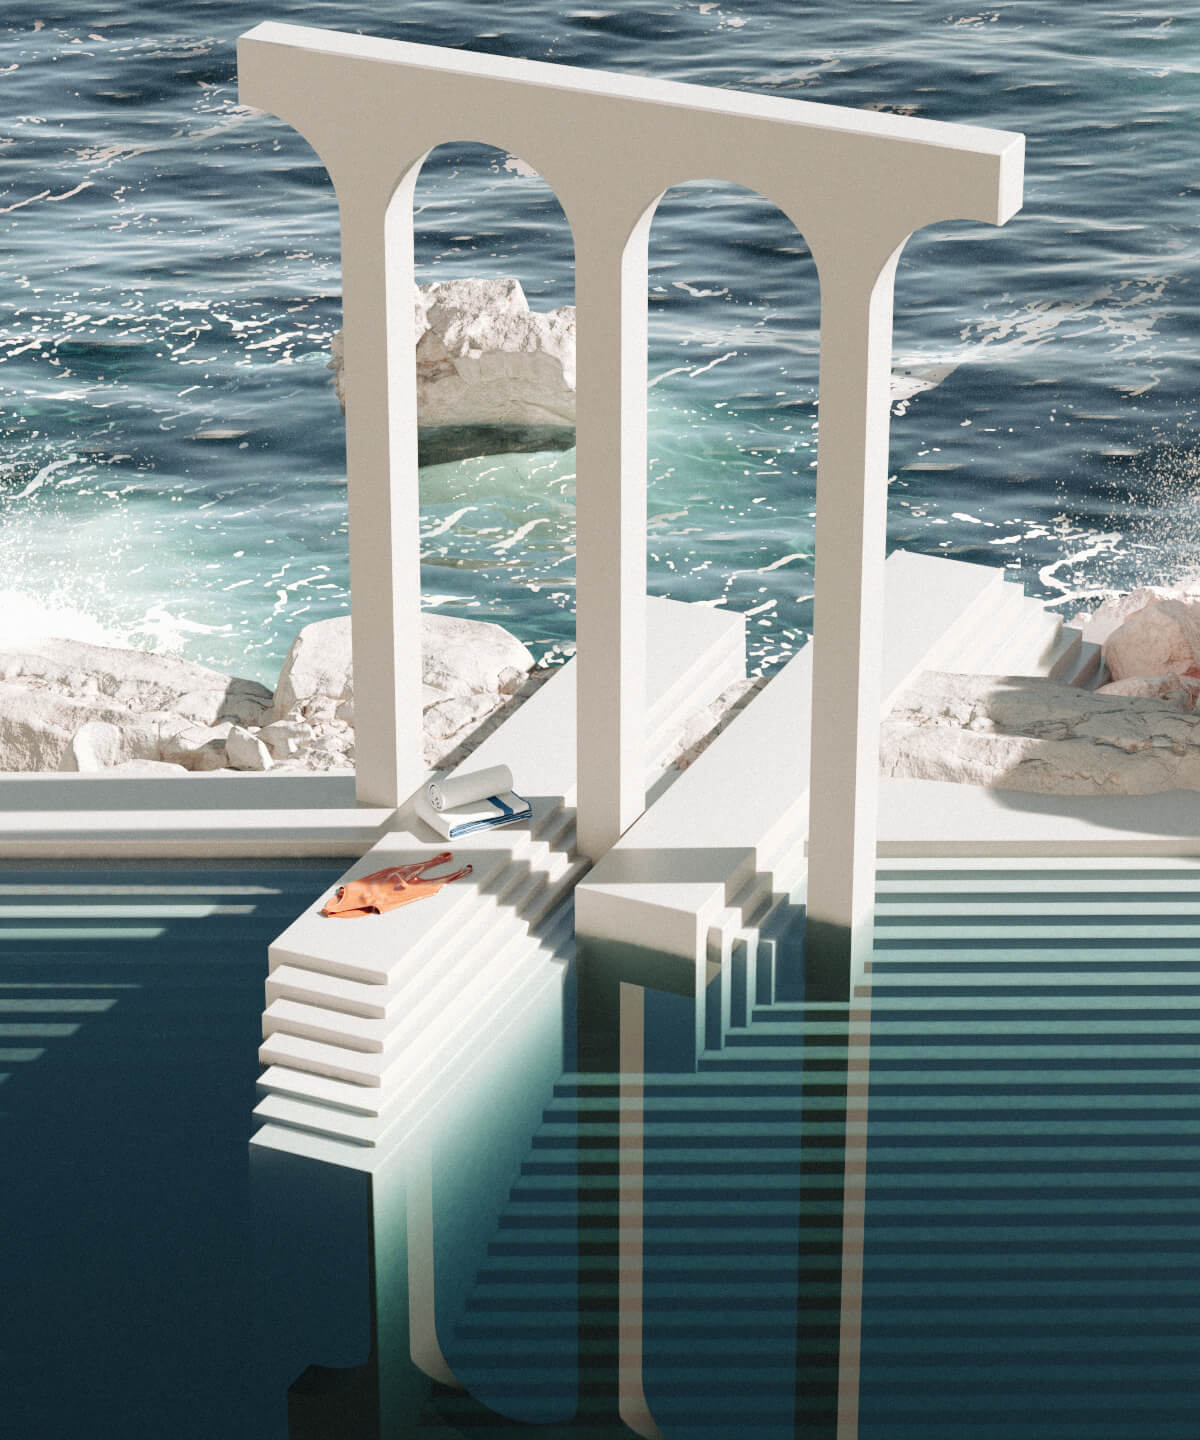 Architecture by ocean rendering